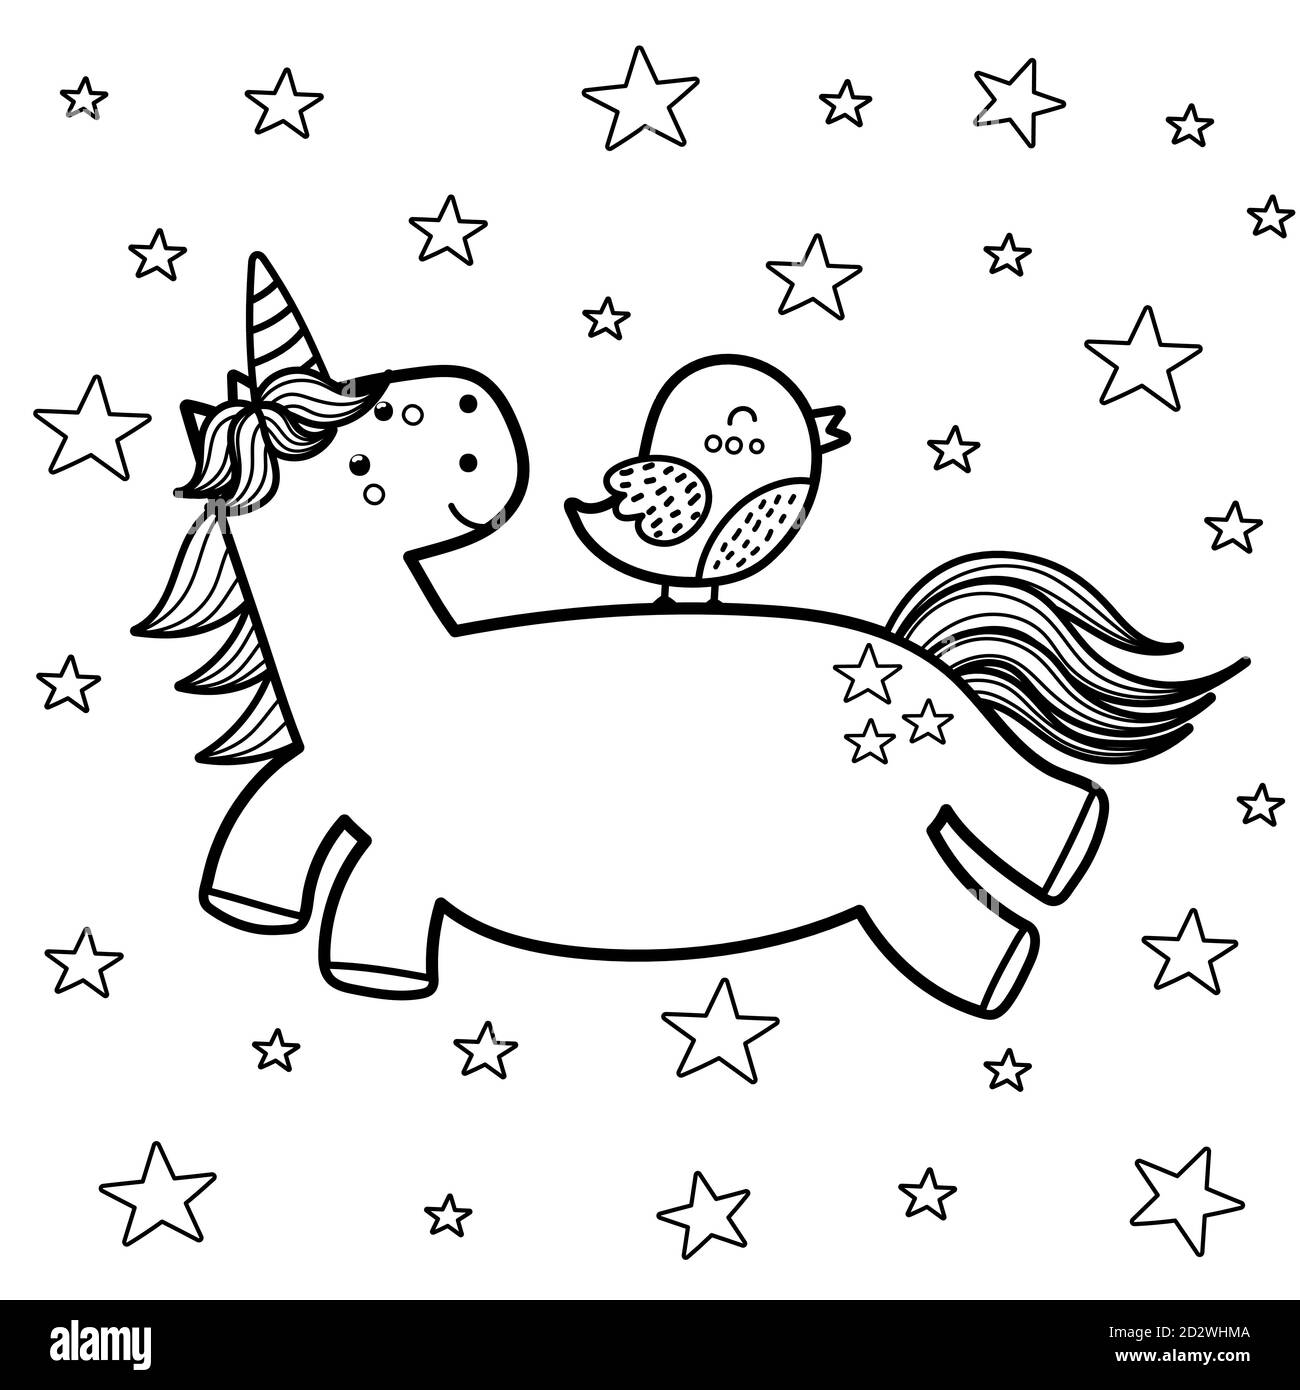 Magic unicorn with his friend bird coloring page. Great for kids colouring book Stock Vector